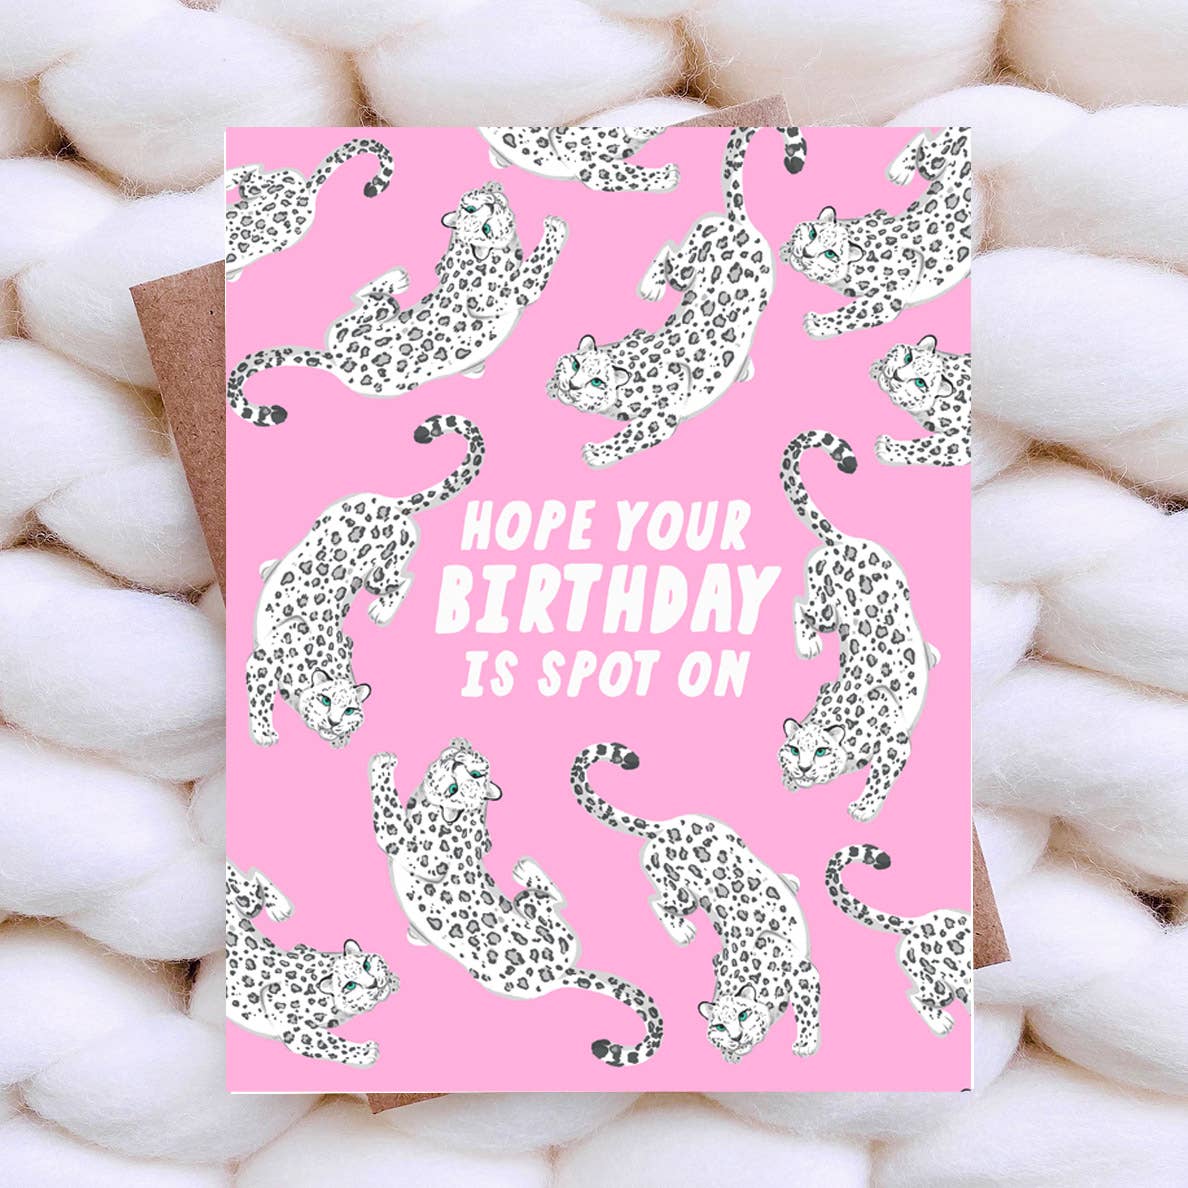 Top Hat and Monocle - Birthday Spot On - Cute Leopard Birthday Card